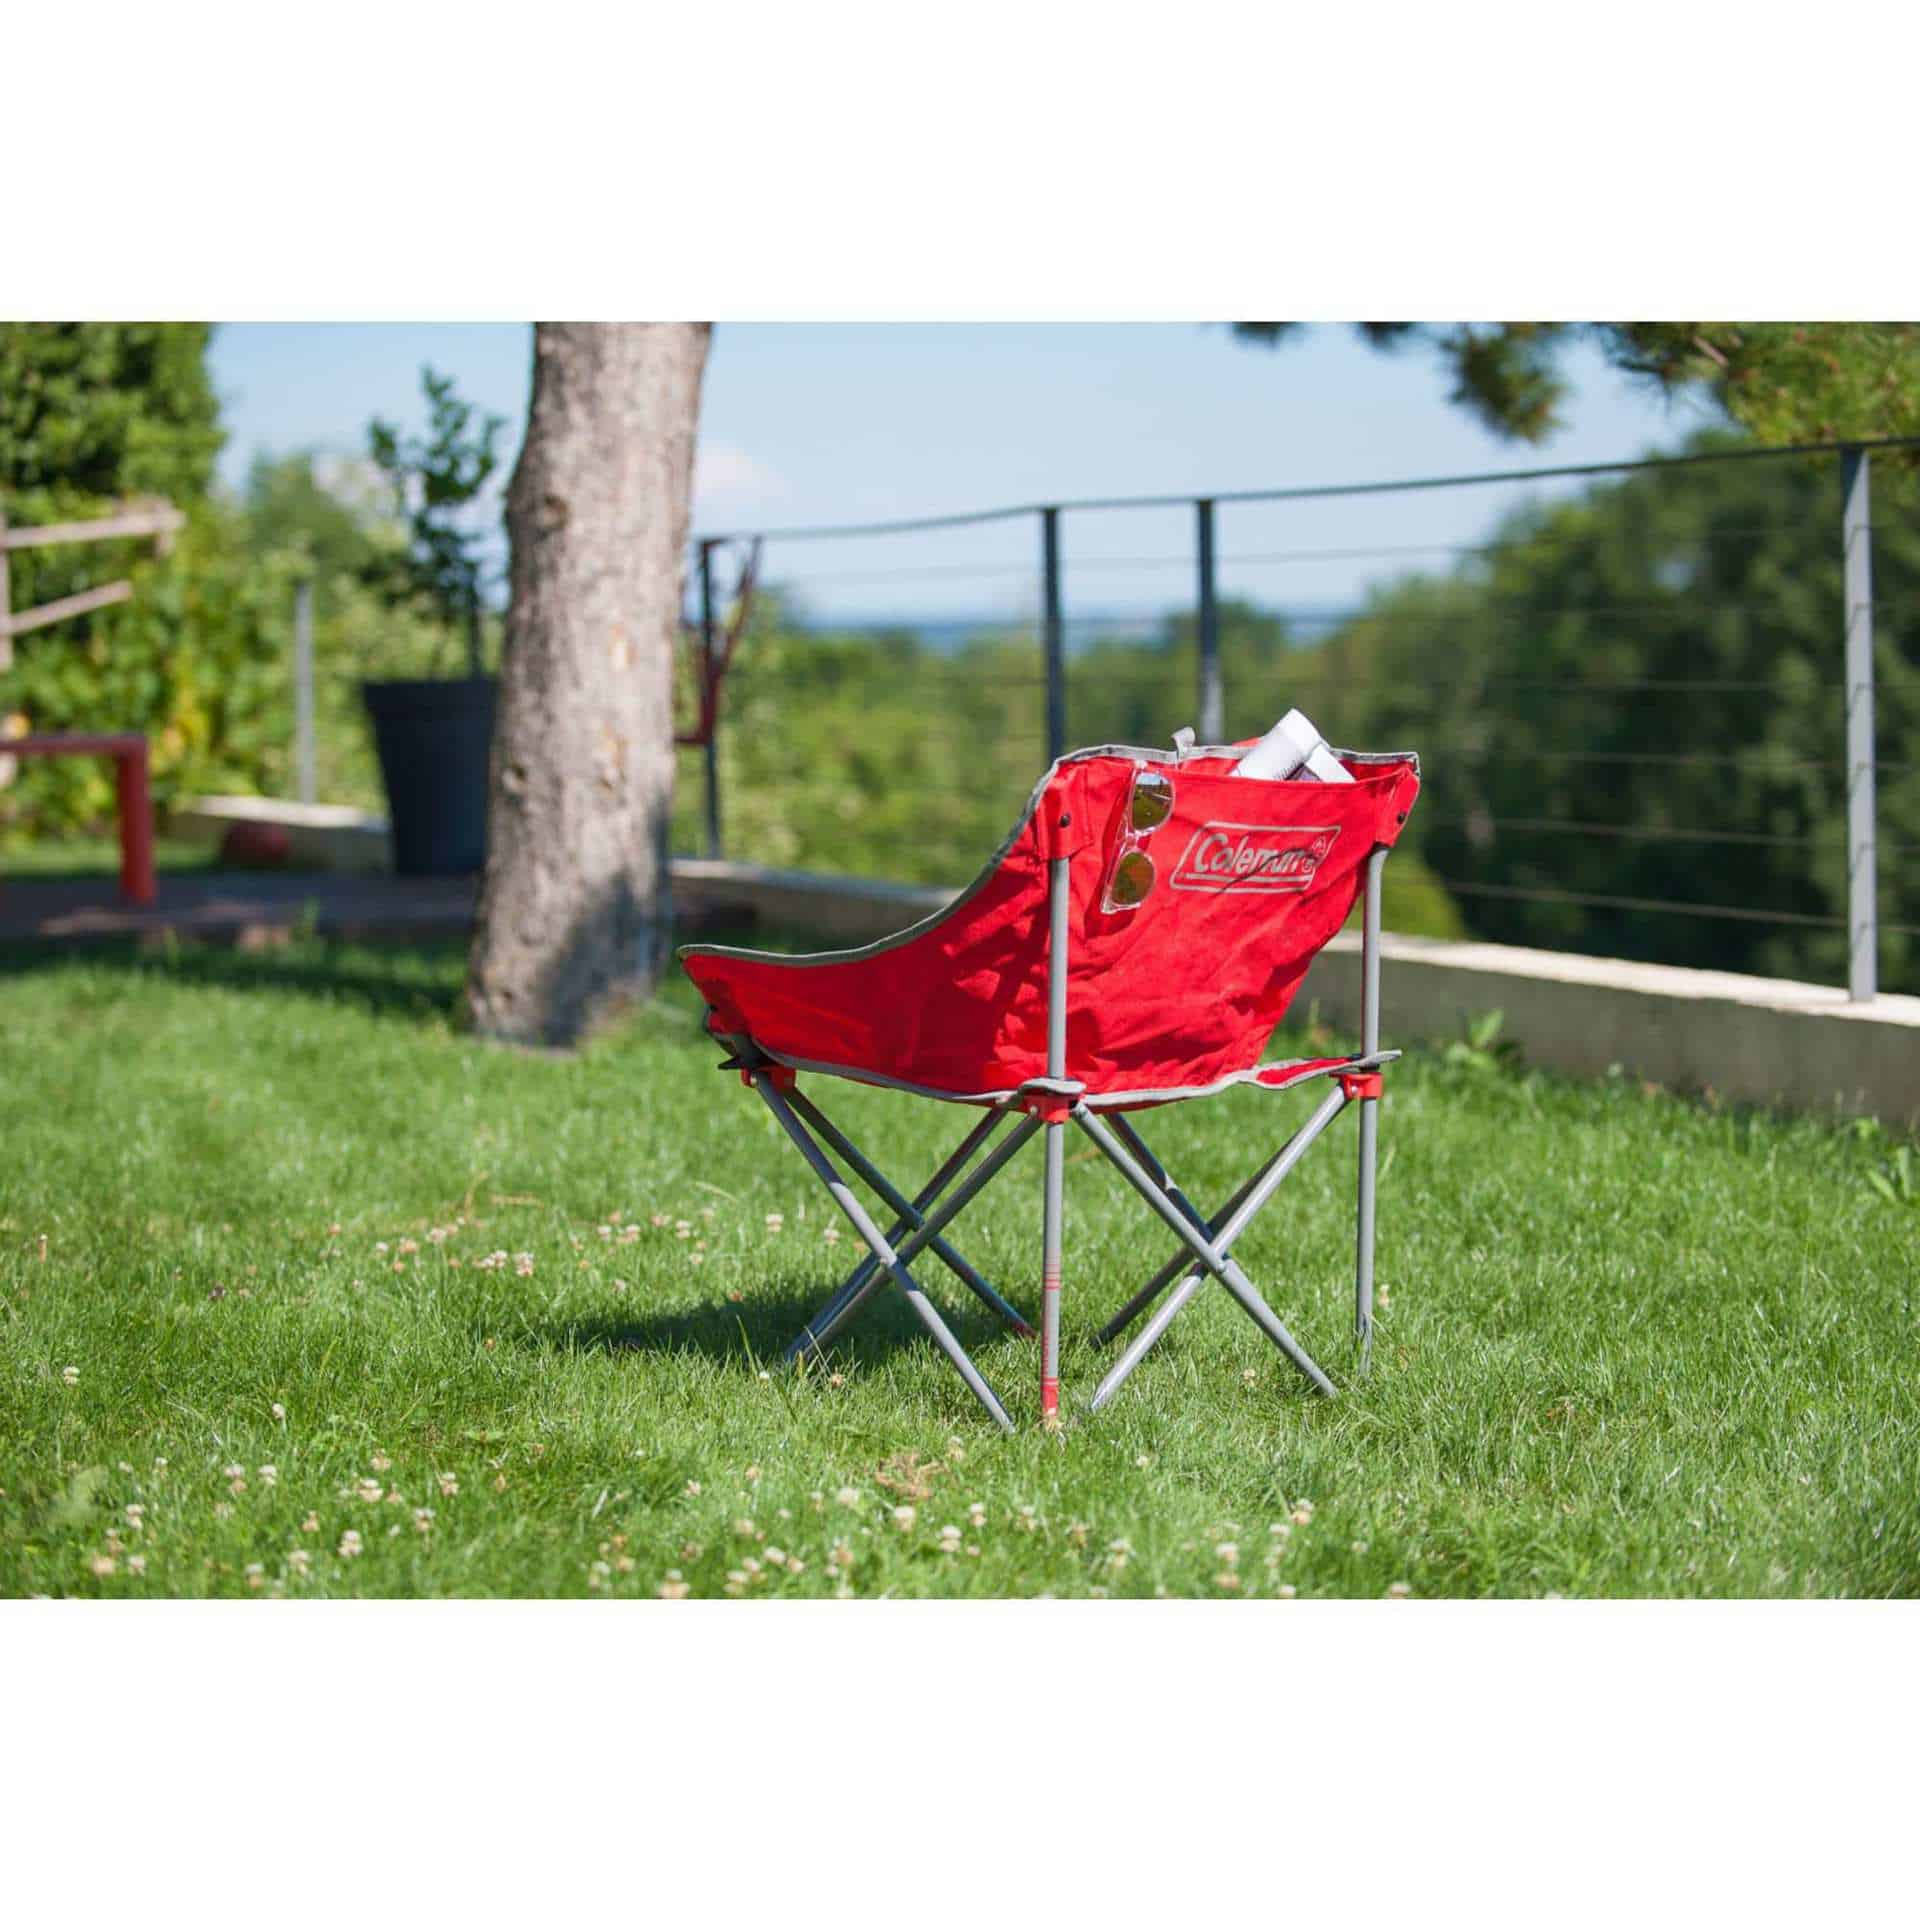 Kickback Camping Chair Red Coleman